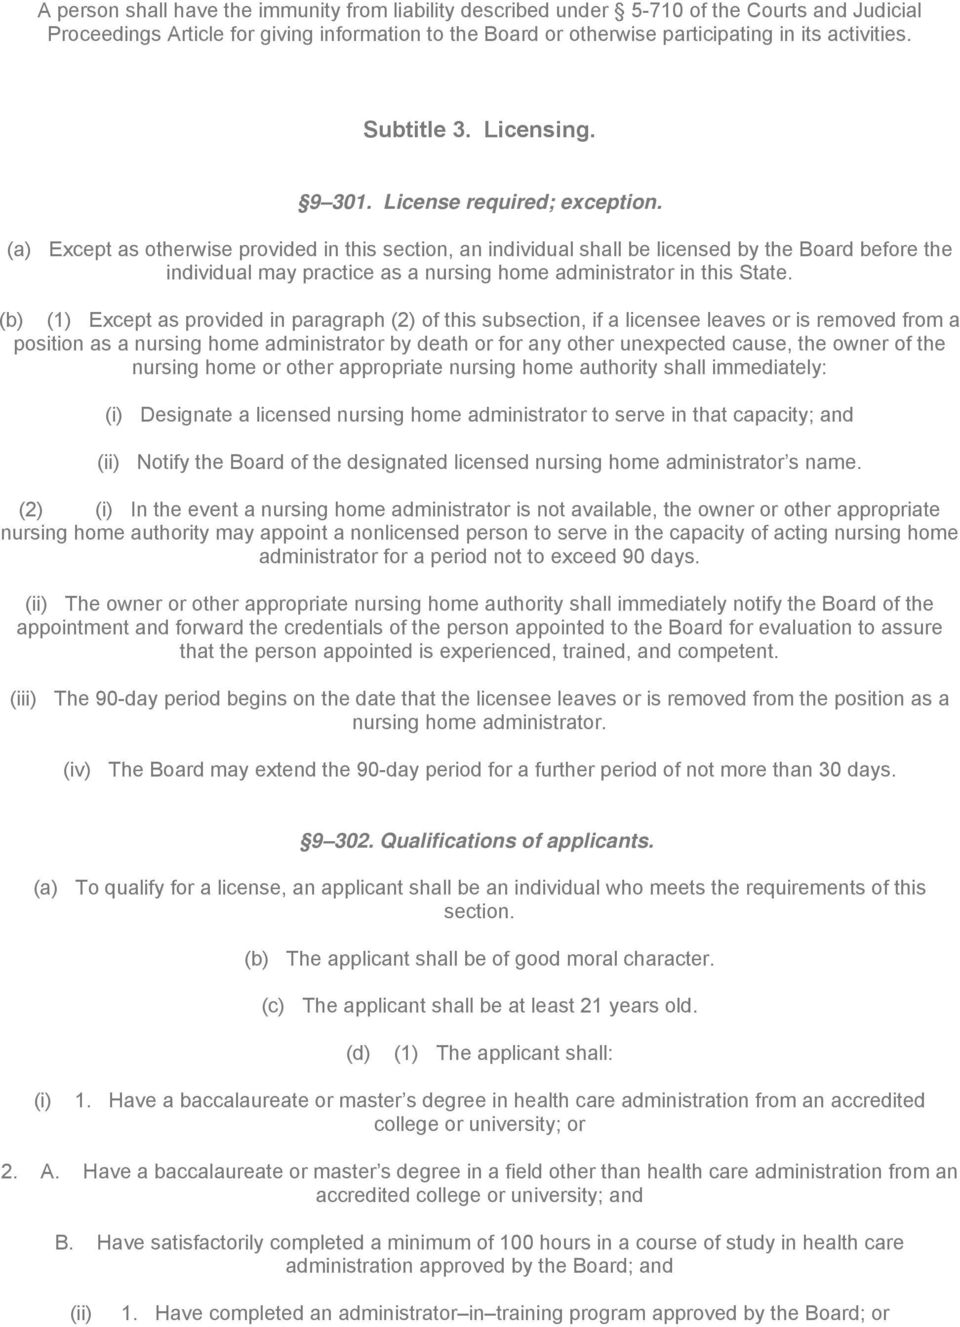 (a) Except as otherwise provided in this section, an individual shall be licensed by the Board before the individual may practice as a nursing home administrator in this State.